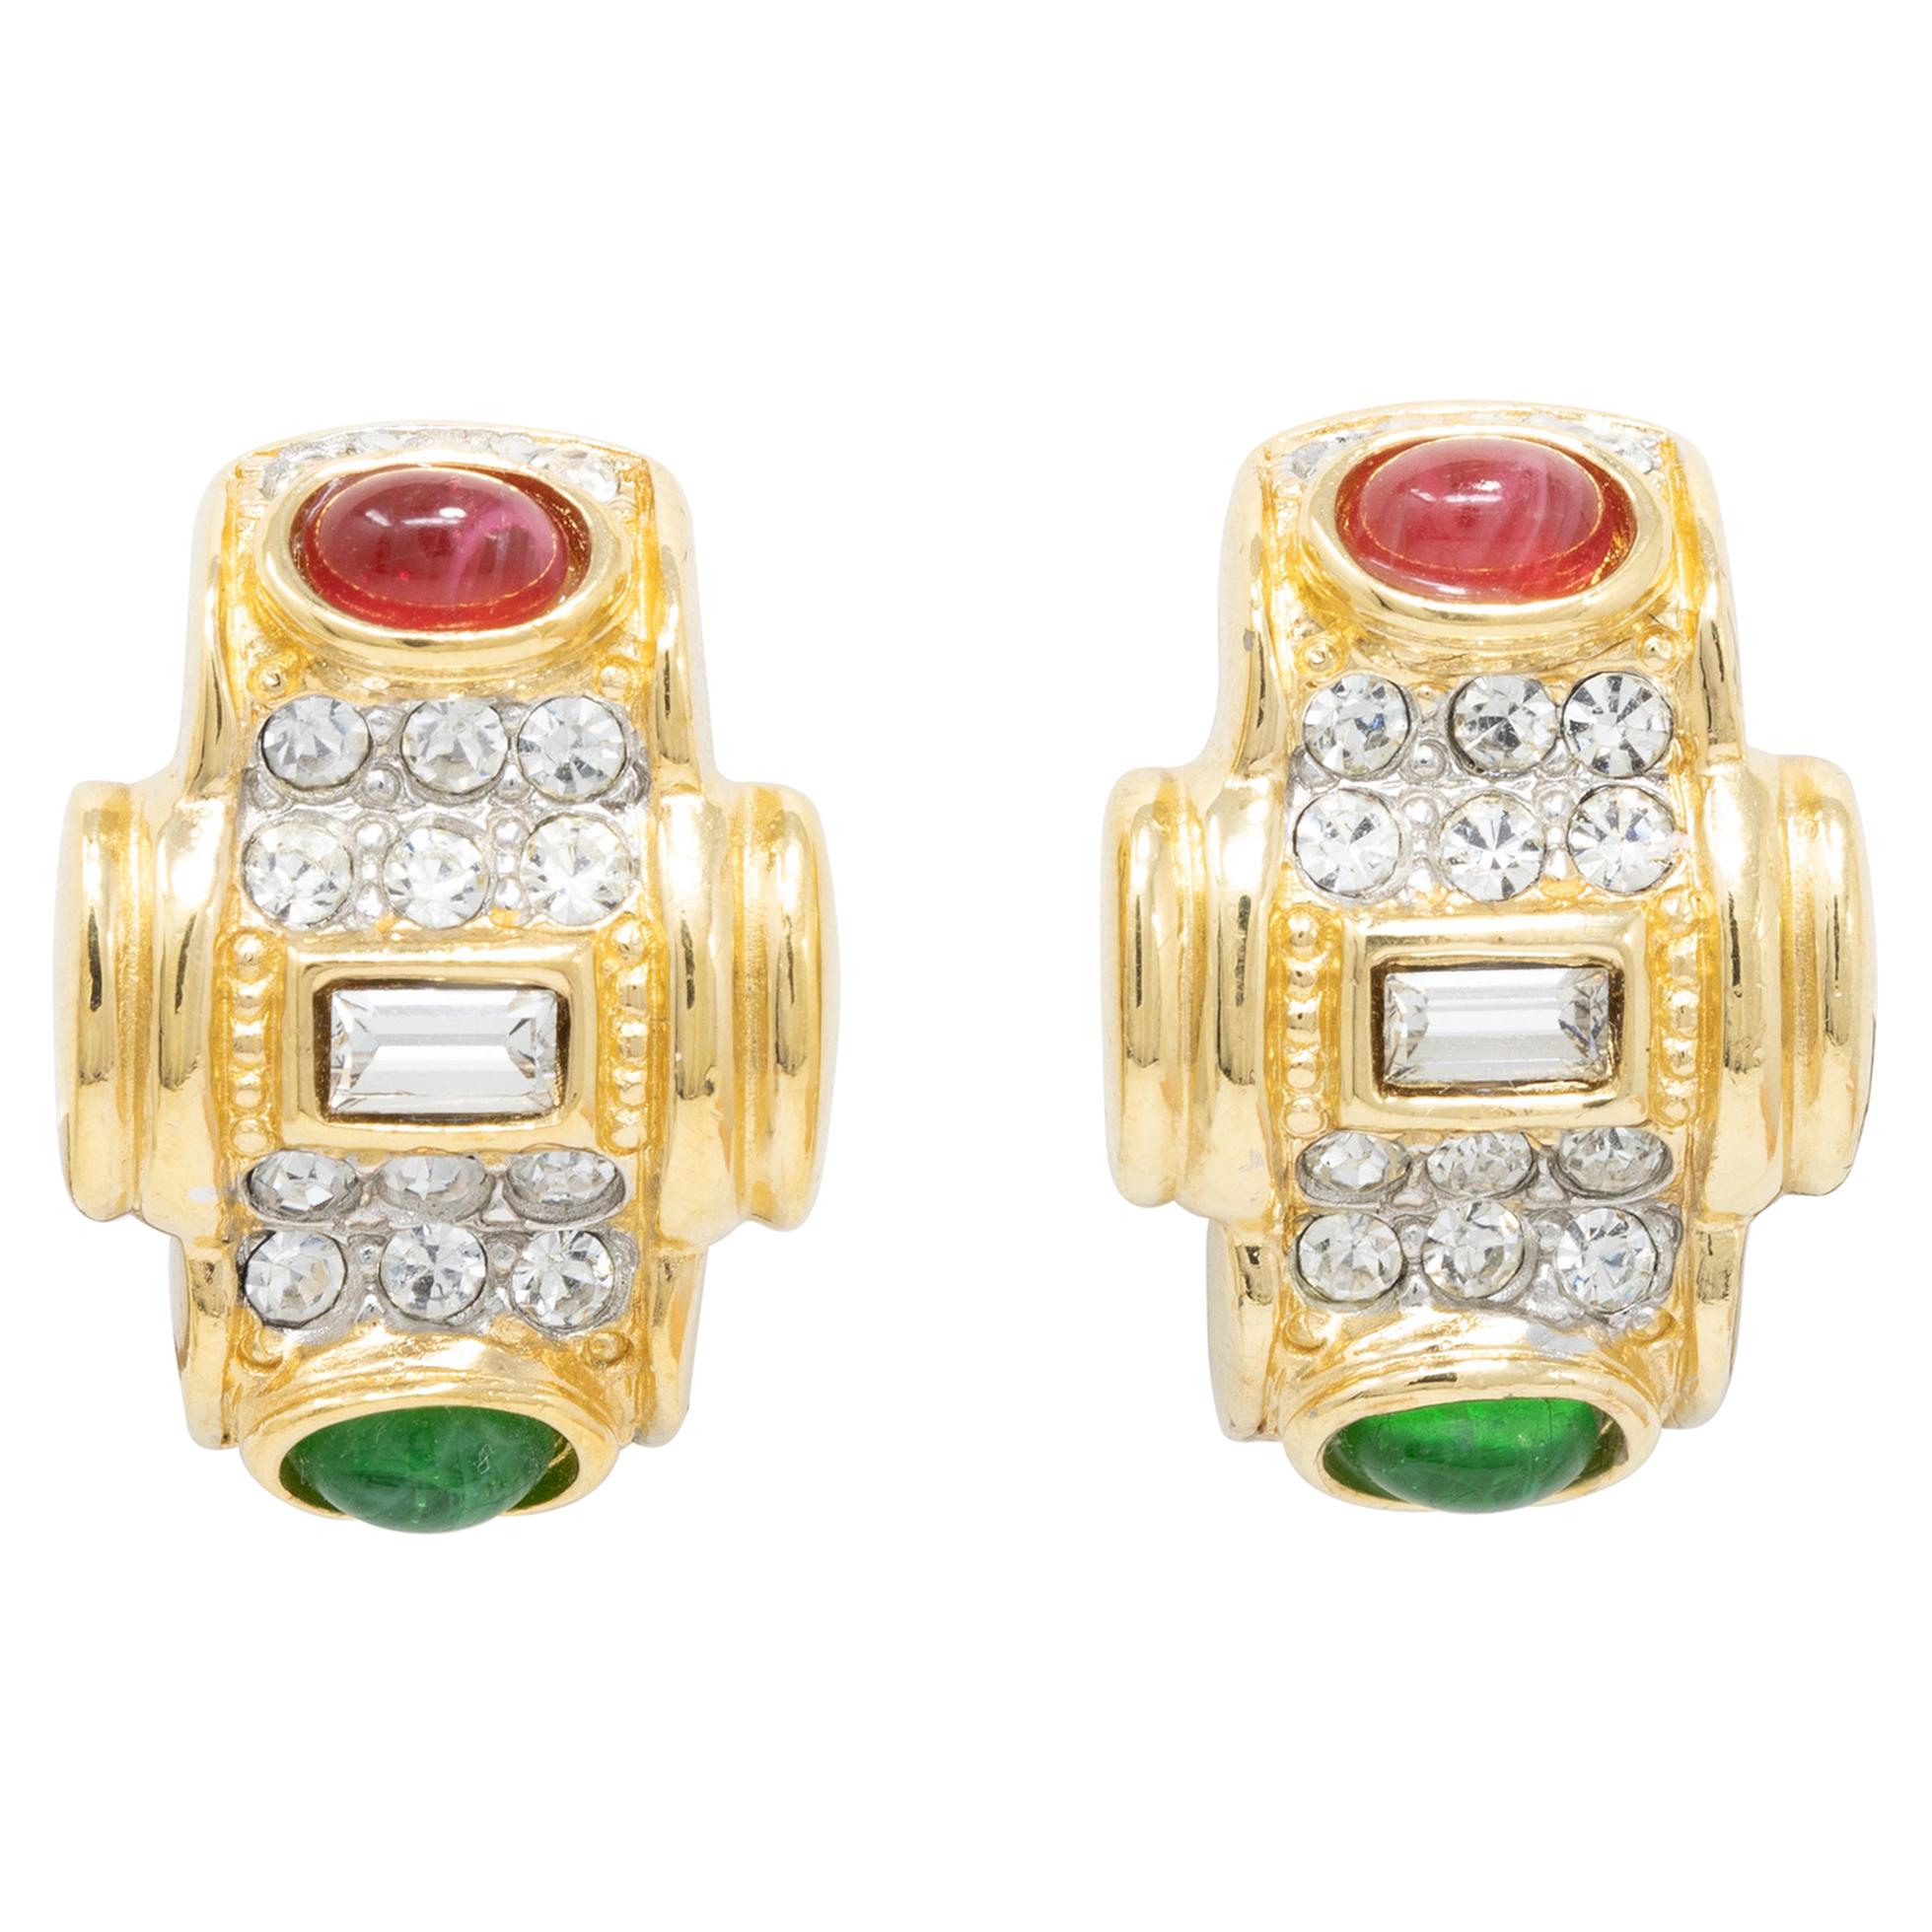 Gold Tone Deco-Style Red and Green Cabochon Retro Clips On Earrings, Mid 1900s For Sale